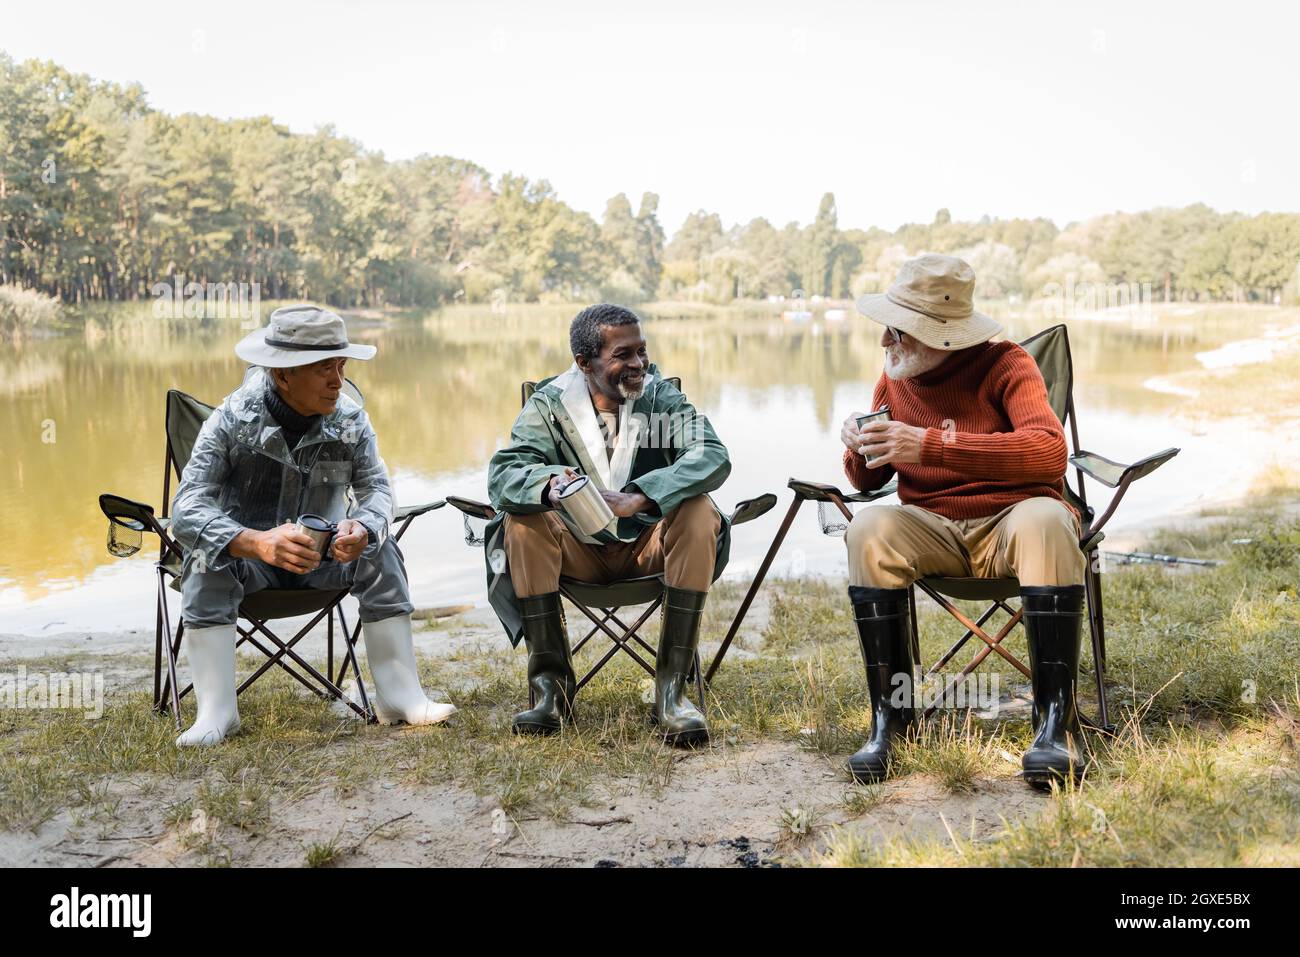 https://c8.alamy.com/comp/2GXE5BX/cheerful-multicultural-men-in-fishing-outfit-holding-thermo-cups-near-lake-2GXE5BX.jpg